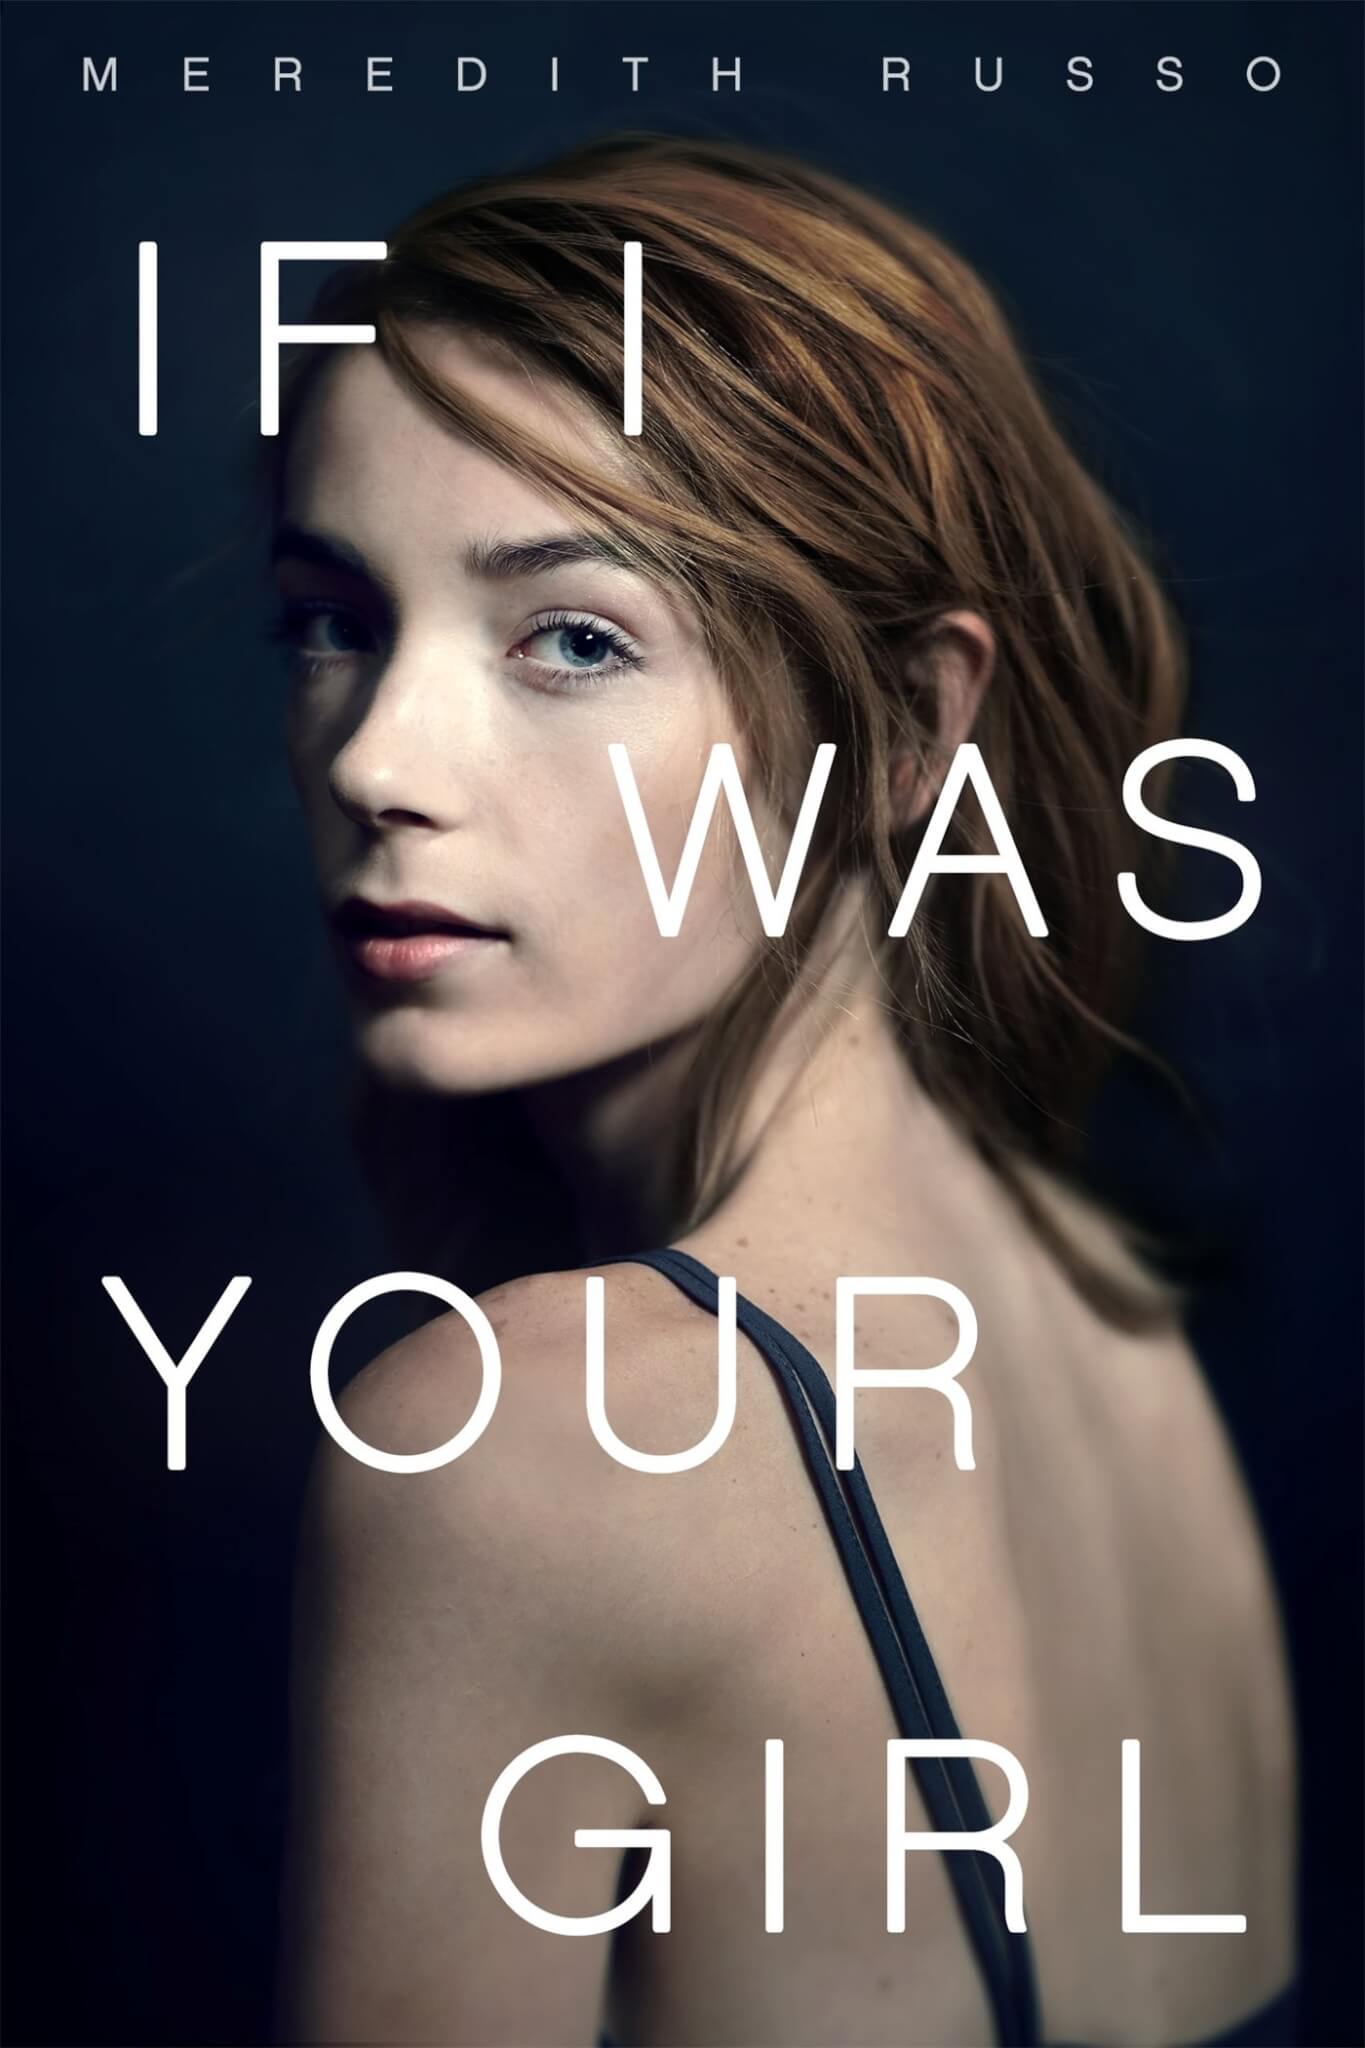 "If I Was Your Girl" di Meredith Russo